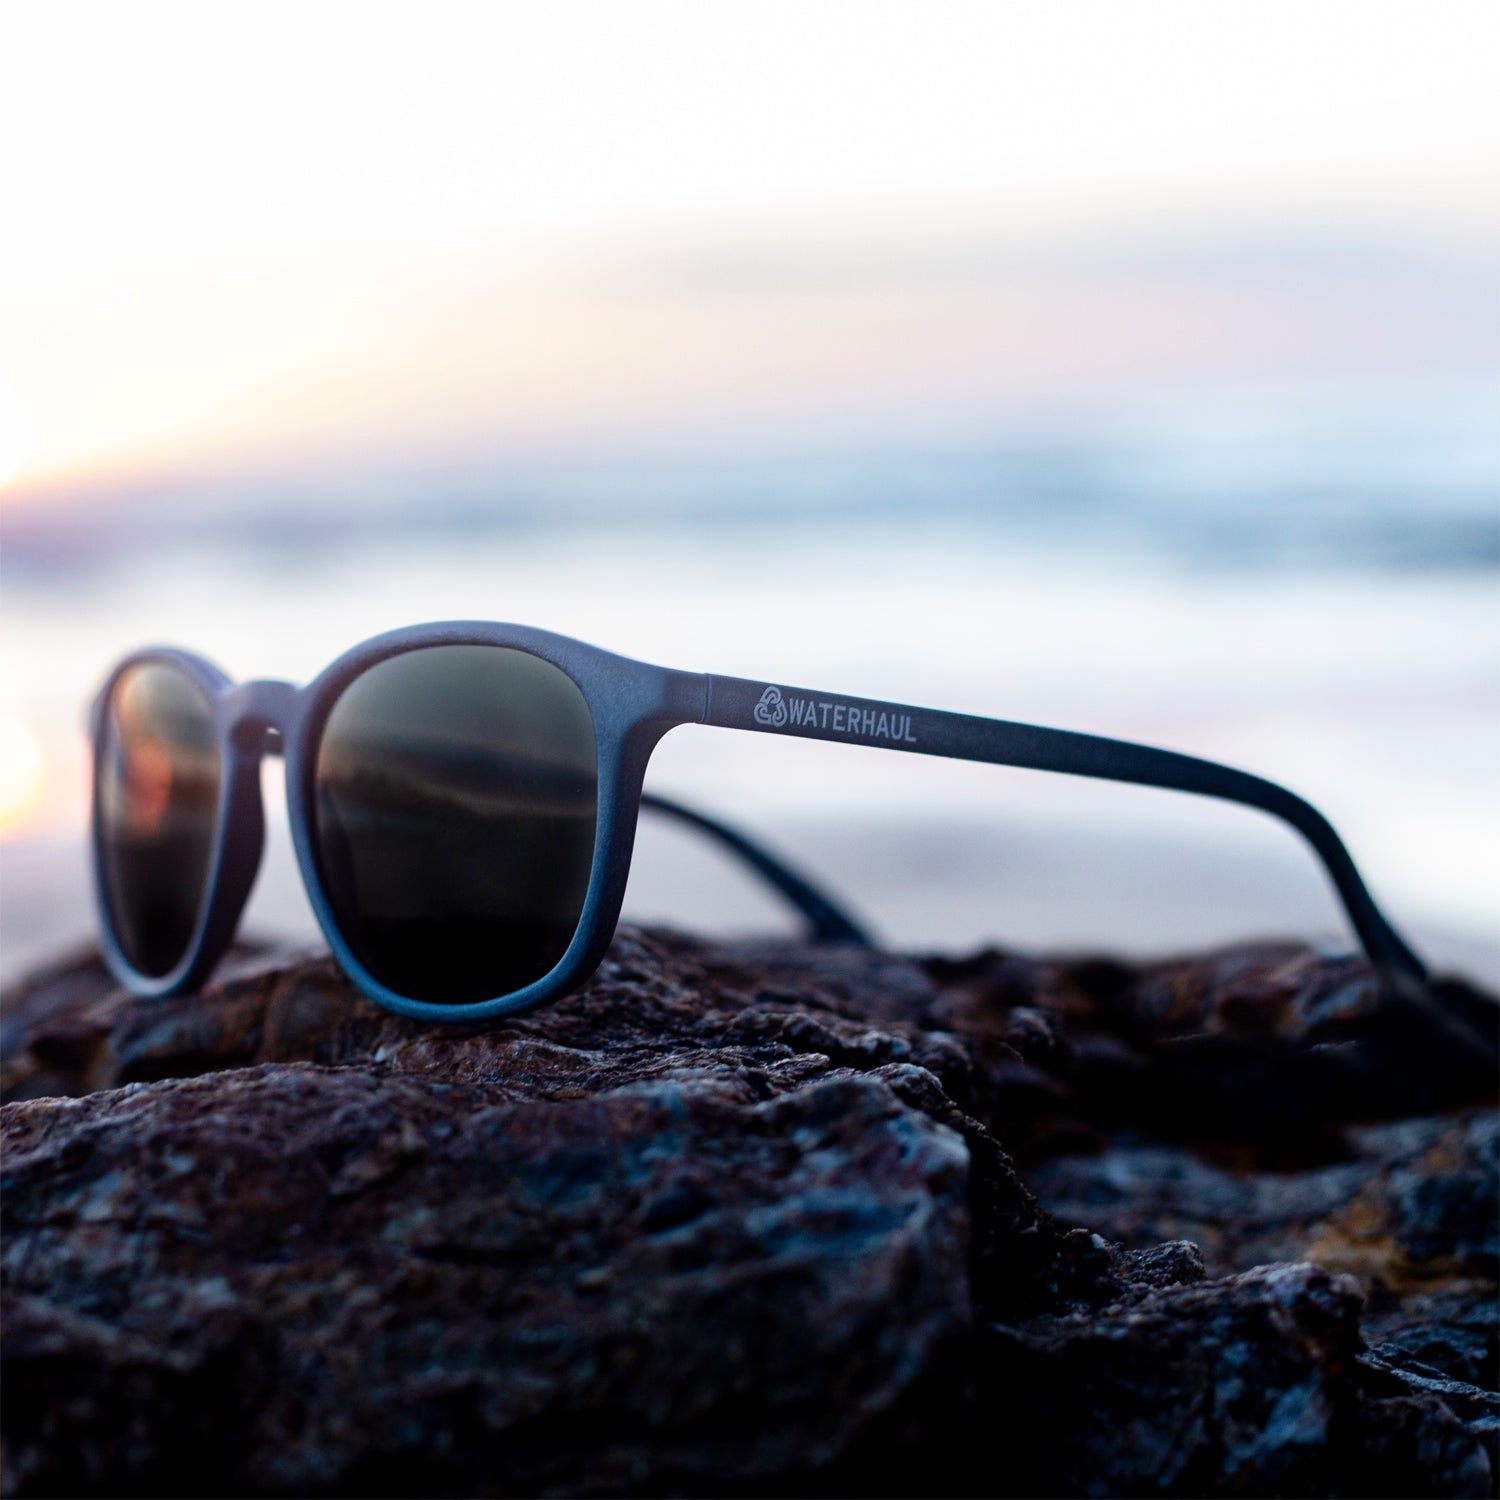 waterhaul kynance navy recycled sunglasses on rocks with sunset reflected in lenses 